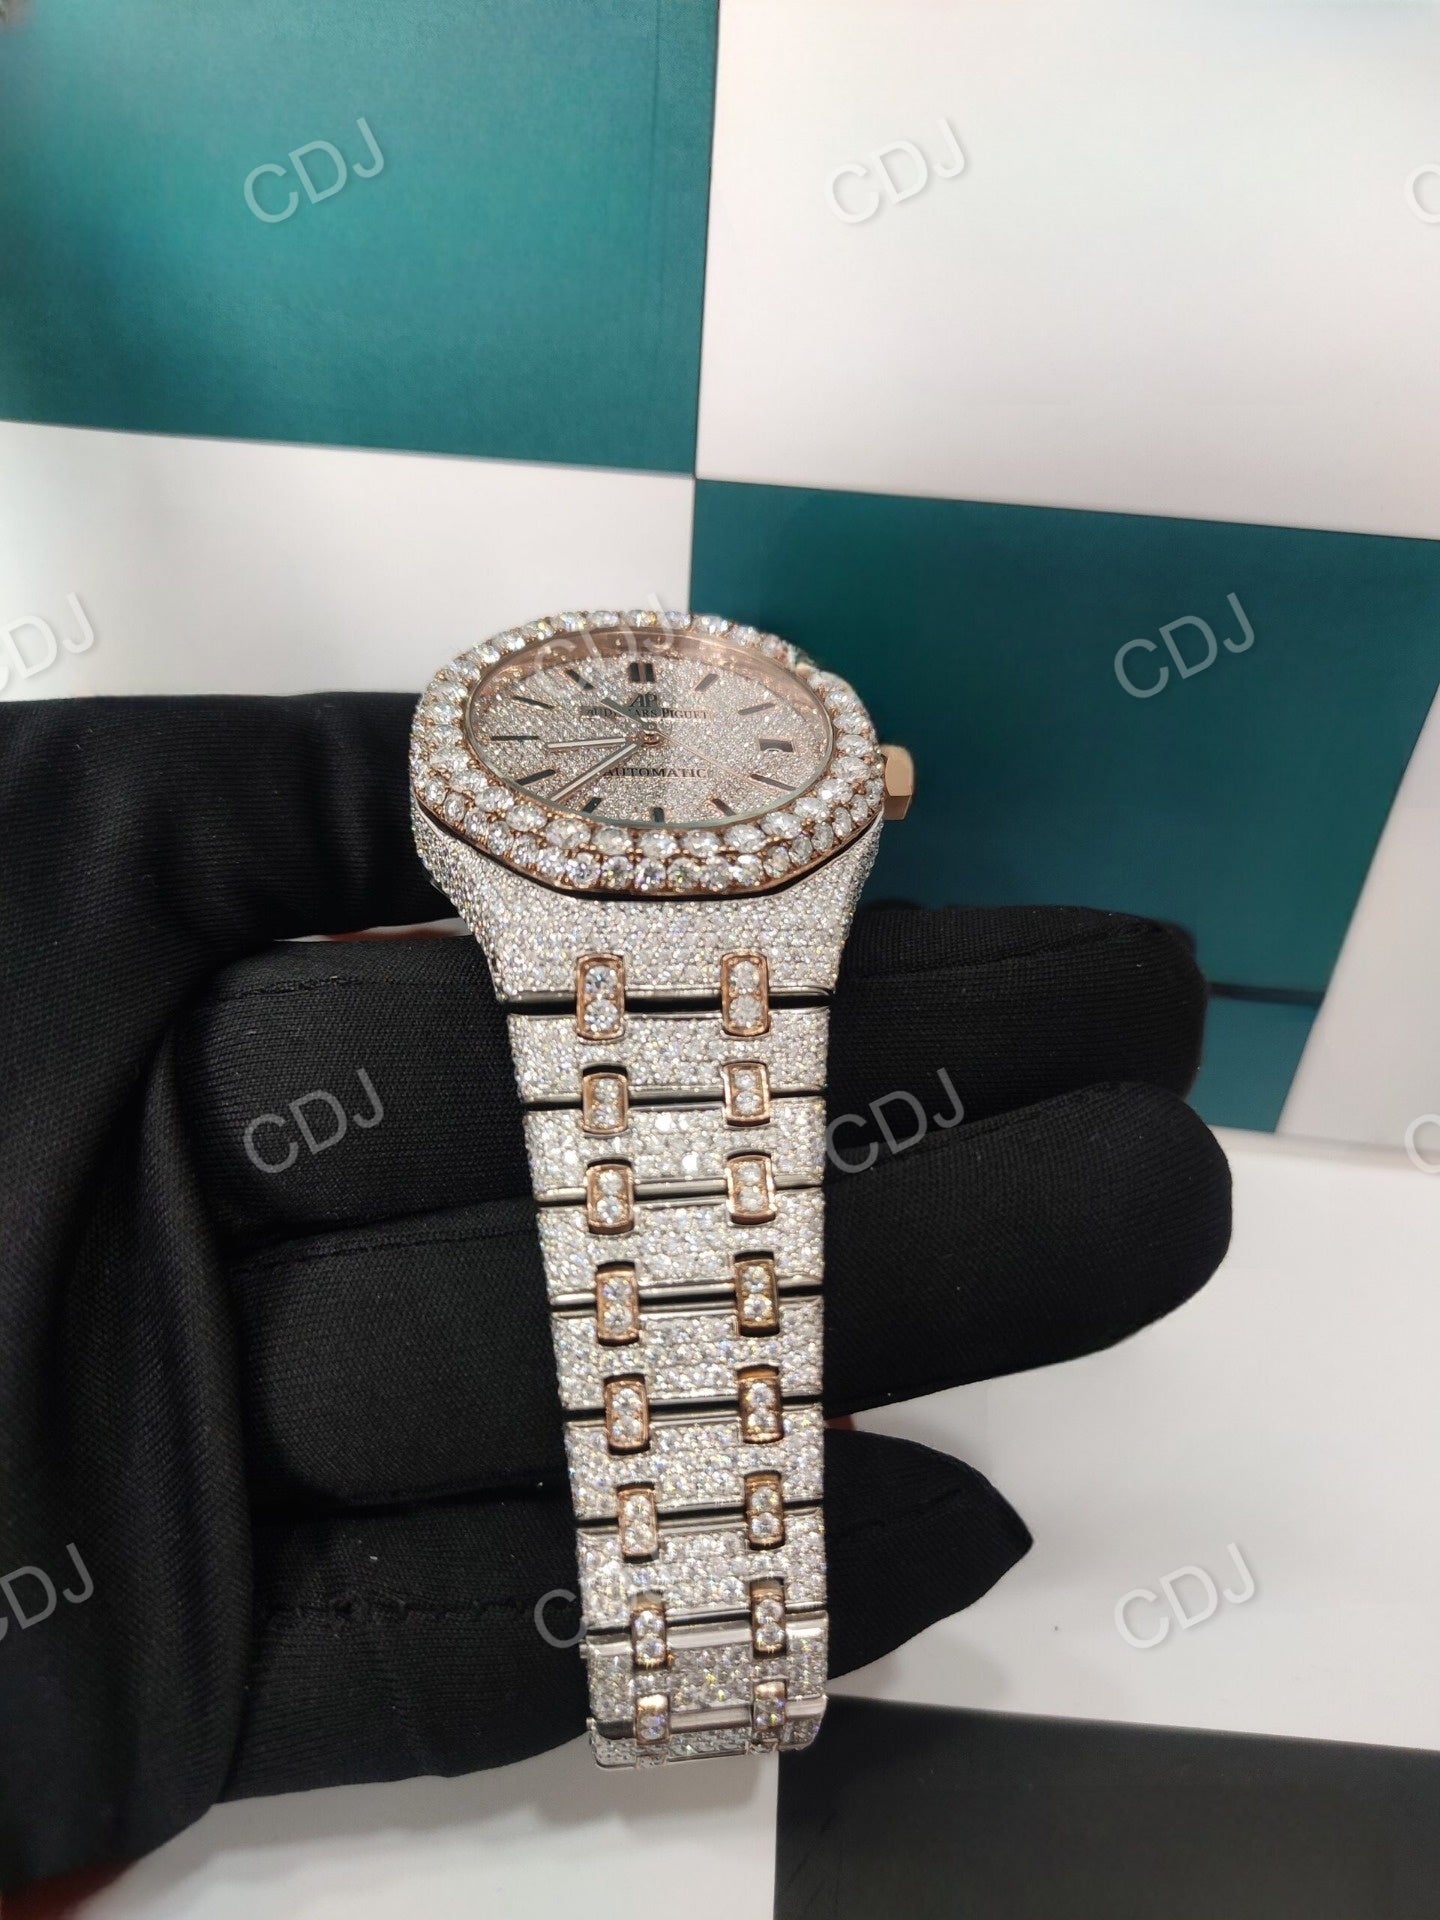 Luxury Fully Diamond Watches For Men Colorless Moissanite Bling Watch High Quality Timeless Piece  customdiamjewel   